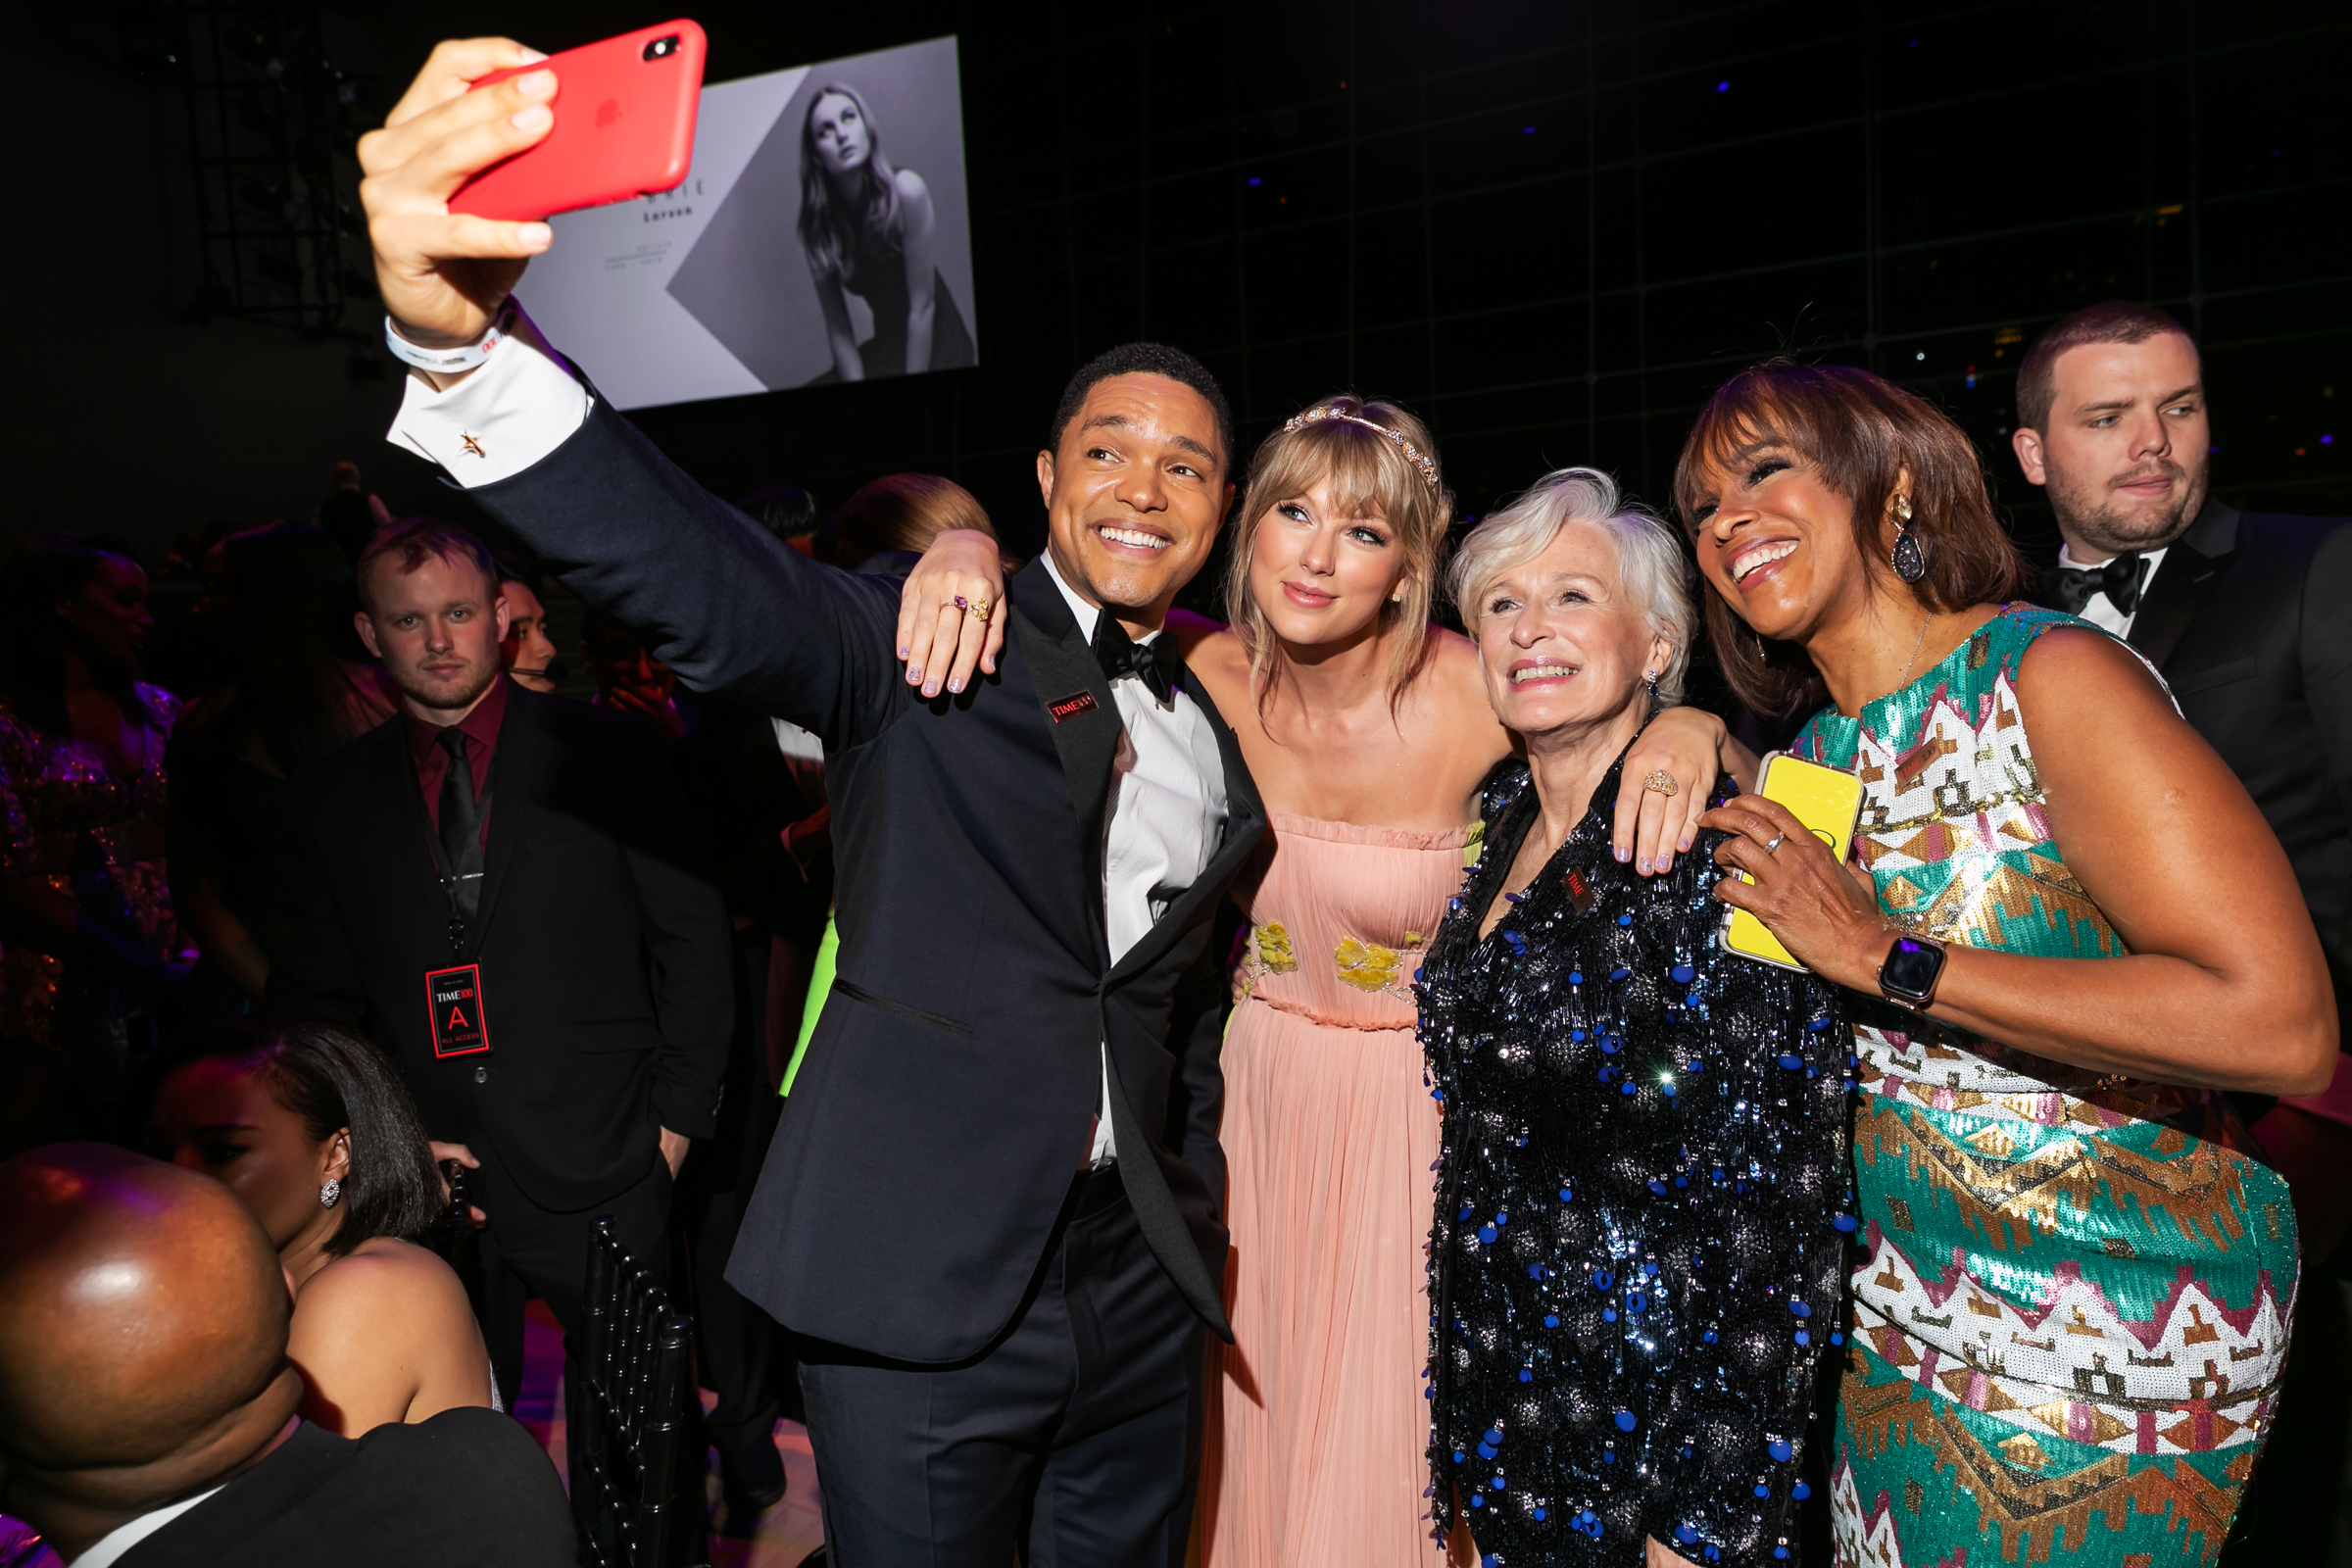 Trevor Noah, Taylor Swift, Glenn Close and Gayle King at the Time 100 Gala at Jazz at Lincoln Center in New York City on April 23, 2019. (Kevin Tachman for TIME)